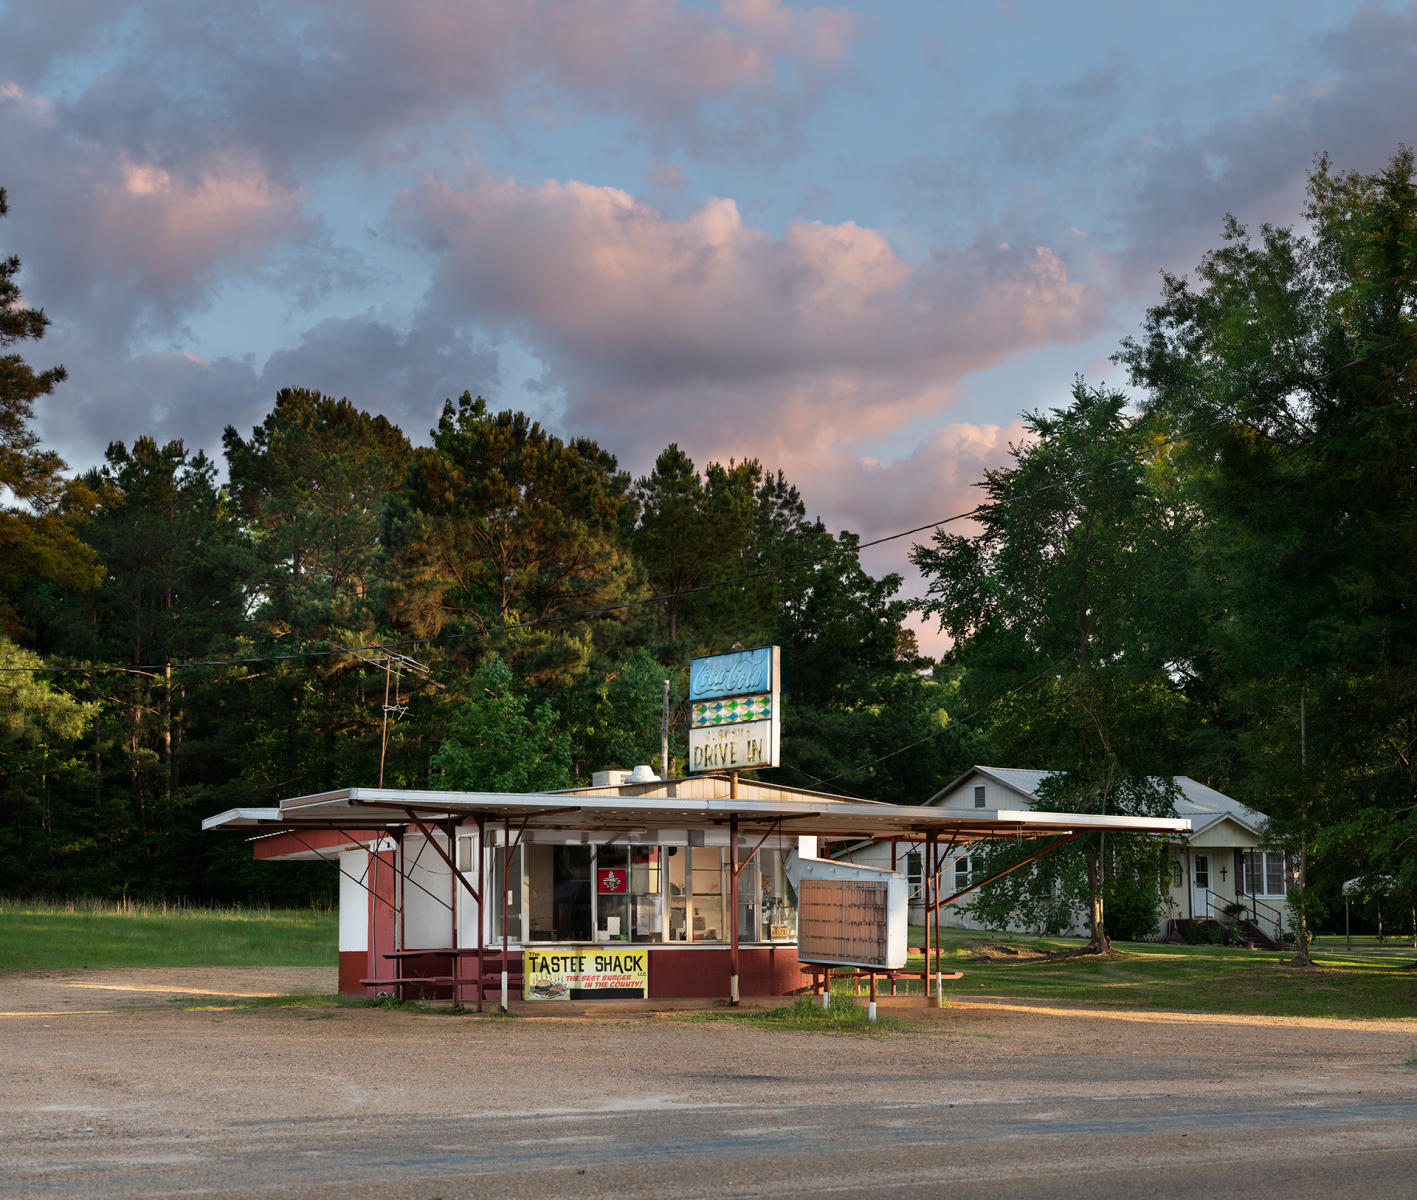 <div class="storycaption">
	<div class="galleryIntroTextArea holder">
		<div class="galleryIntroTextContent">
			<div class="galleryIntroTextContentInside">
				<div class="frishhead">
					ABDUCTION SITE 
				</div>
				<div class="frishsubhead">
					MEADVILLE, MISSISSIPPI 
				</div>
				<div class="frishtext">
					On May 2, 1964, Charles Eddie Moore, a college student, and Henry Hezekiah Dee, a millworker, both 19 and from Franklin County, Mississippi, were picked up by KKK members while hitchhiking from this Meadville drive-in, at the time known as Tastee Treat. They were abducted, interrogated and tortured in a nearby forest, locked in a trunk of a car, driven across state lines, chained to a Jeep motor block and train rails, and dropped alive into the Mississippi River to die. Moore's and Dee's mangled torsos were discovered on July 12 and 13, 1964 during the frantic FBI search for James Chaney, Andrew Goodman, and Michael Schwerner, the three civil rights workers who disappeared on June 21. When it was discovered that the bodies were those of two black men and not those of the civil rights workers, two of whom were white, media interest evaporated and the press moved on. While the FBI investigated the case and arrested two suspects in November 1964, the district attorney concluded there was insufficient evidence for prosecution. The case was dropped by local authorities, some of whom were complicit in the crime, according to FBI and HUAC documents. In January 2007 the murderer, James Ford Seale, was arrested. 
				</div>
				<div class="frishdate">
					PHOTOGRAPHED: 2019 
				</div>
			</div>
		</div>
	</div>
</div> : IMAGES : Ghosts of Segregation